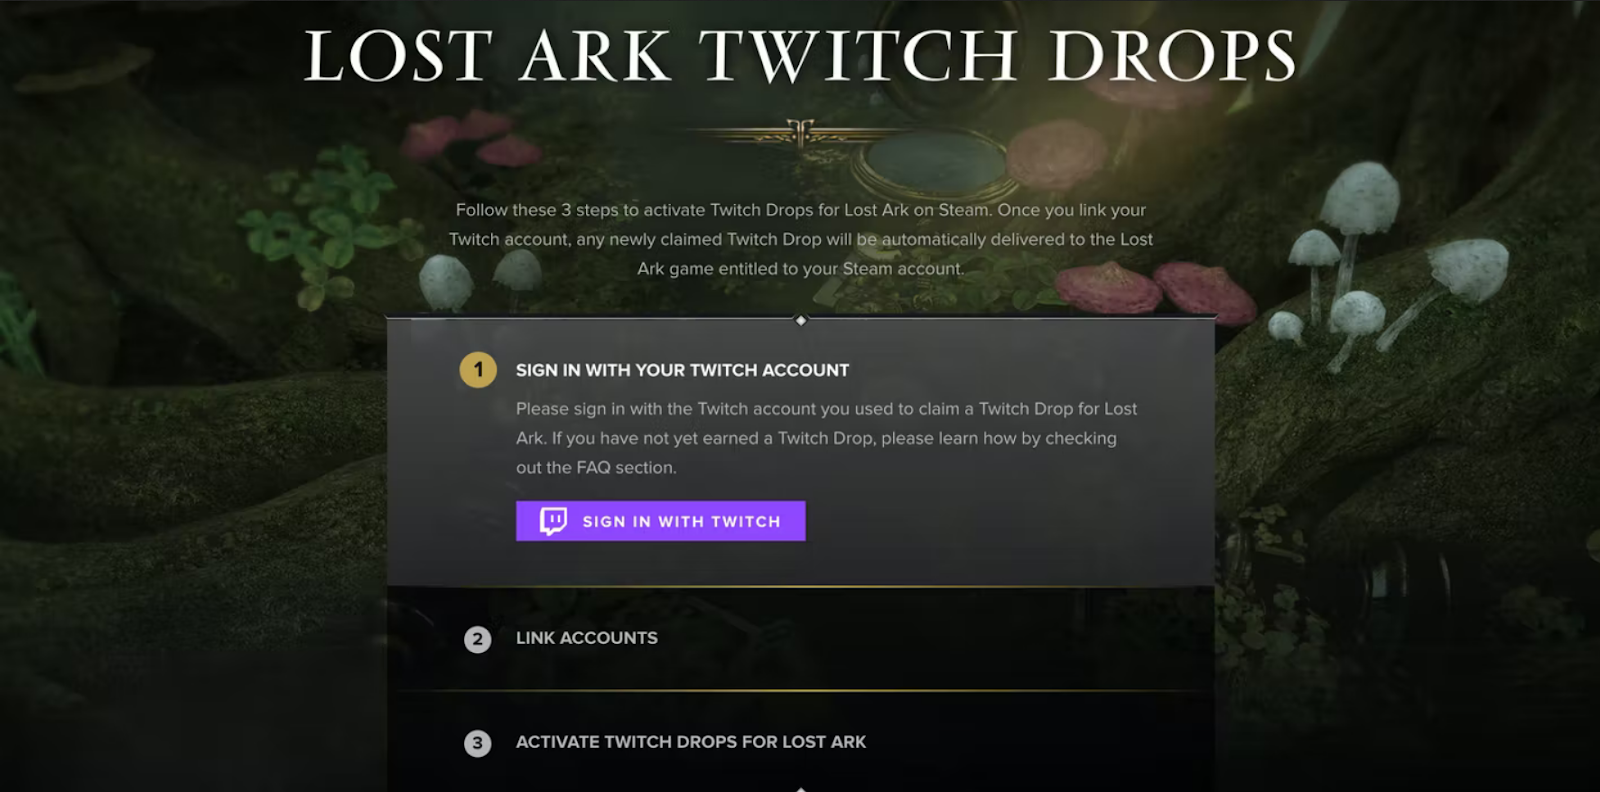 Lost Ark Twitch Drops link page